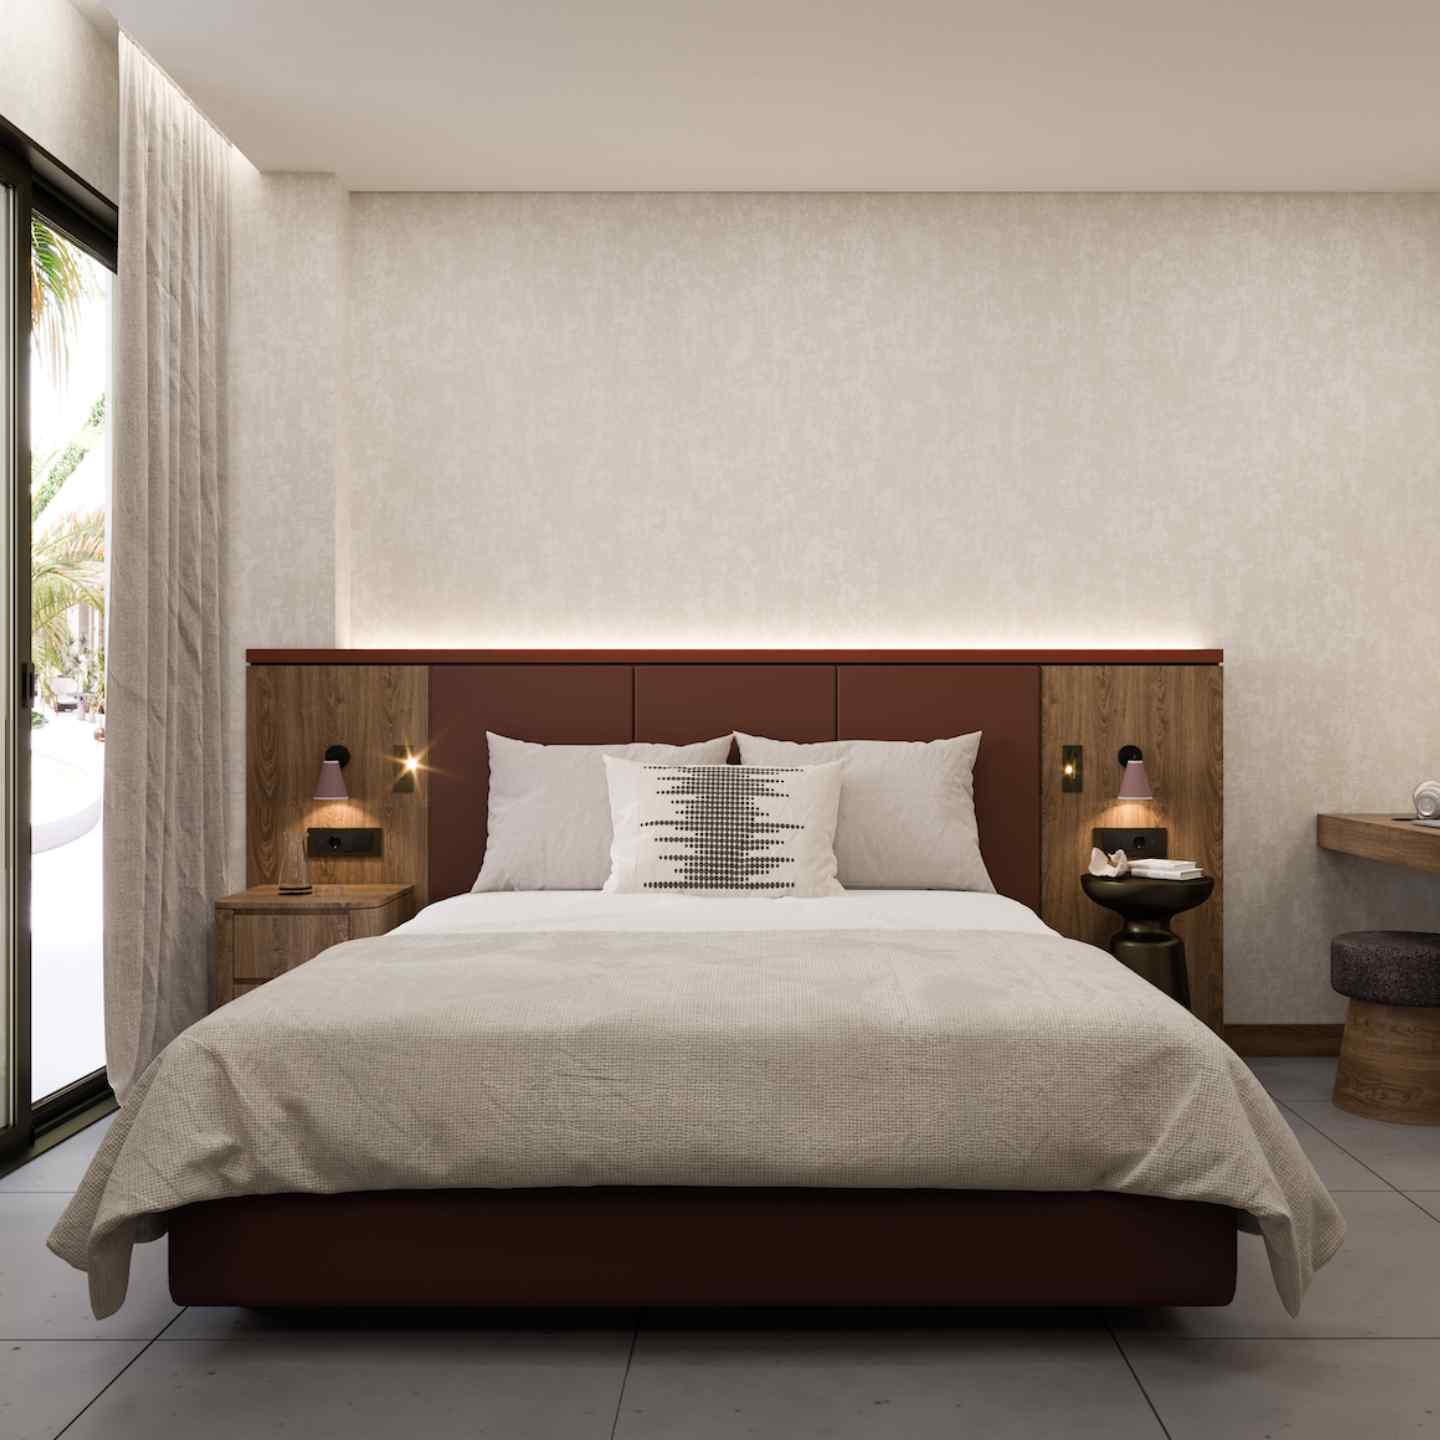 Large bed with wooden headboard and beige bedding with beige wall and curtains in the background